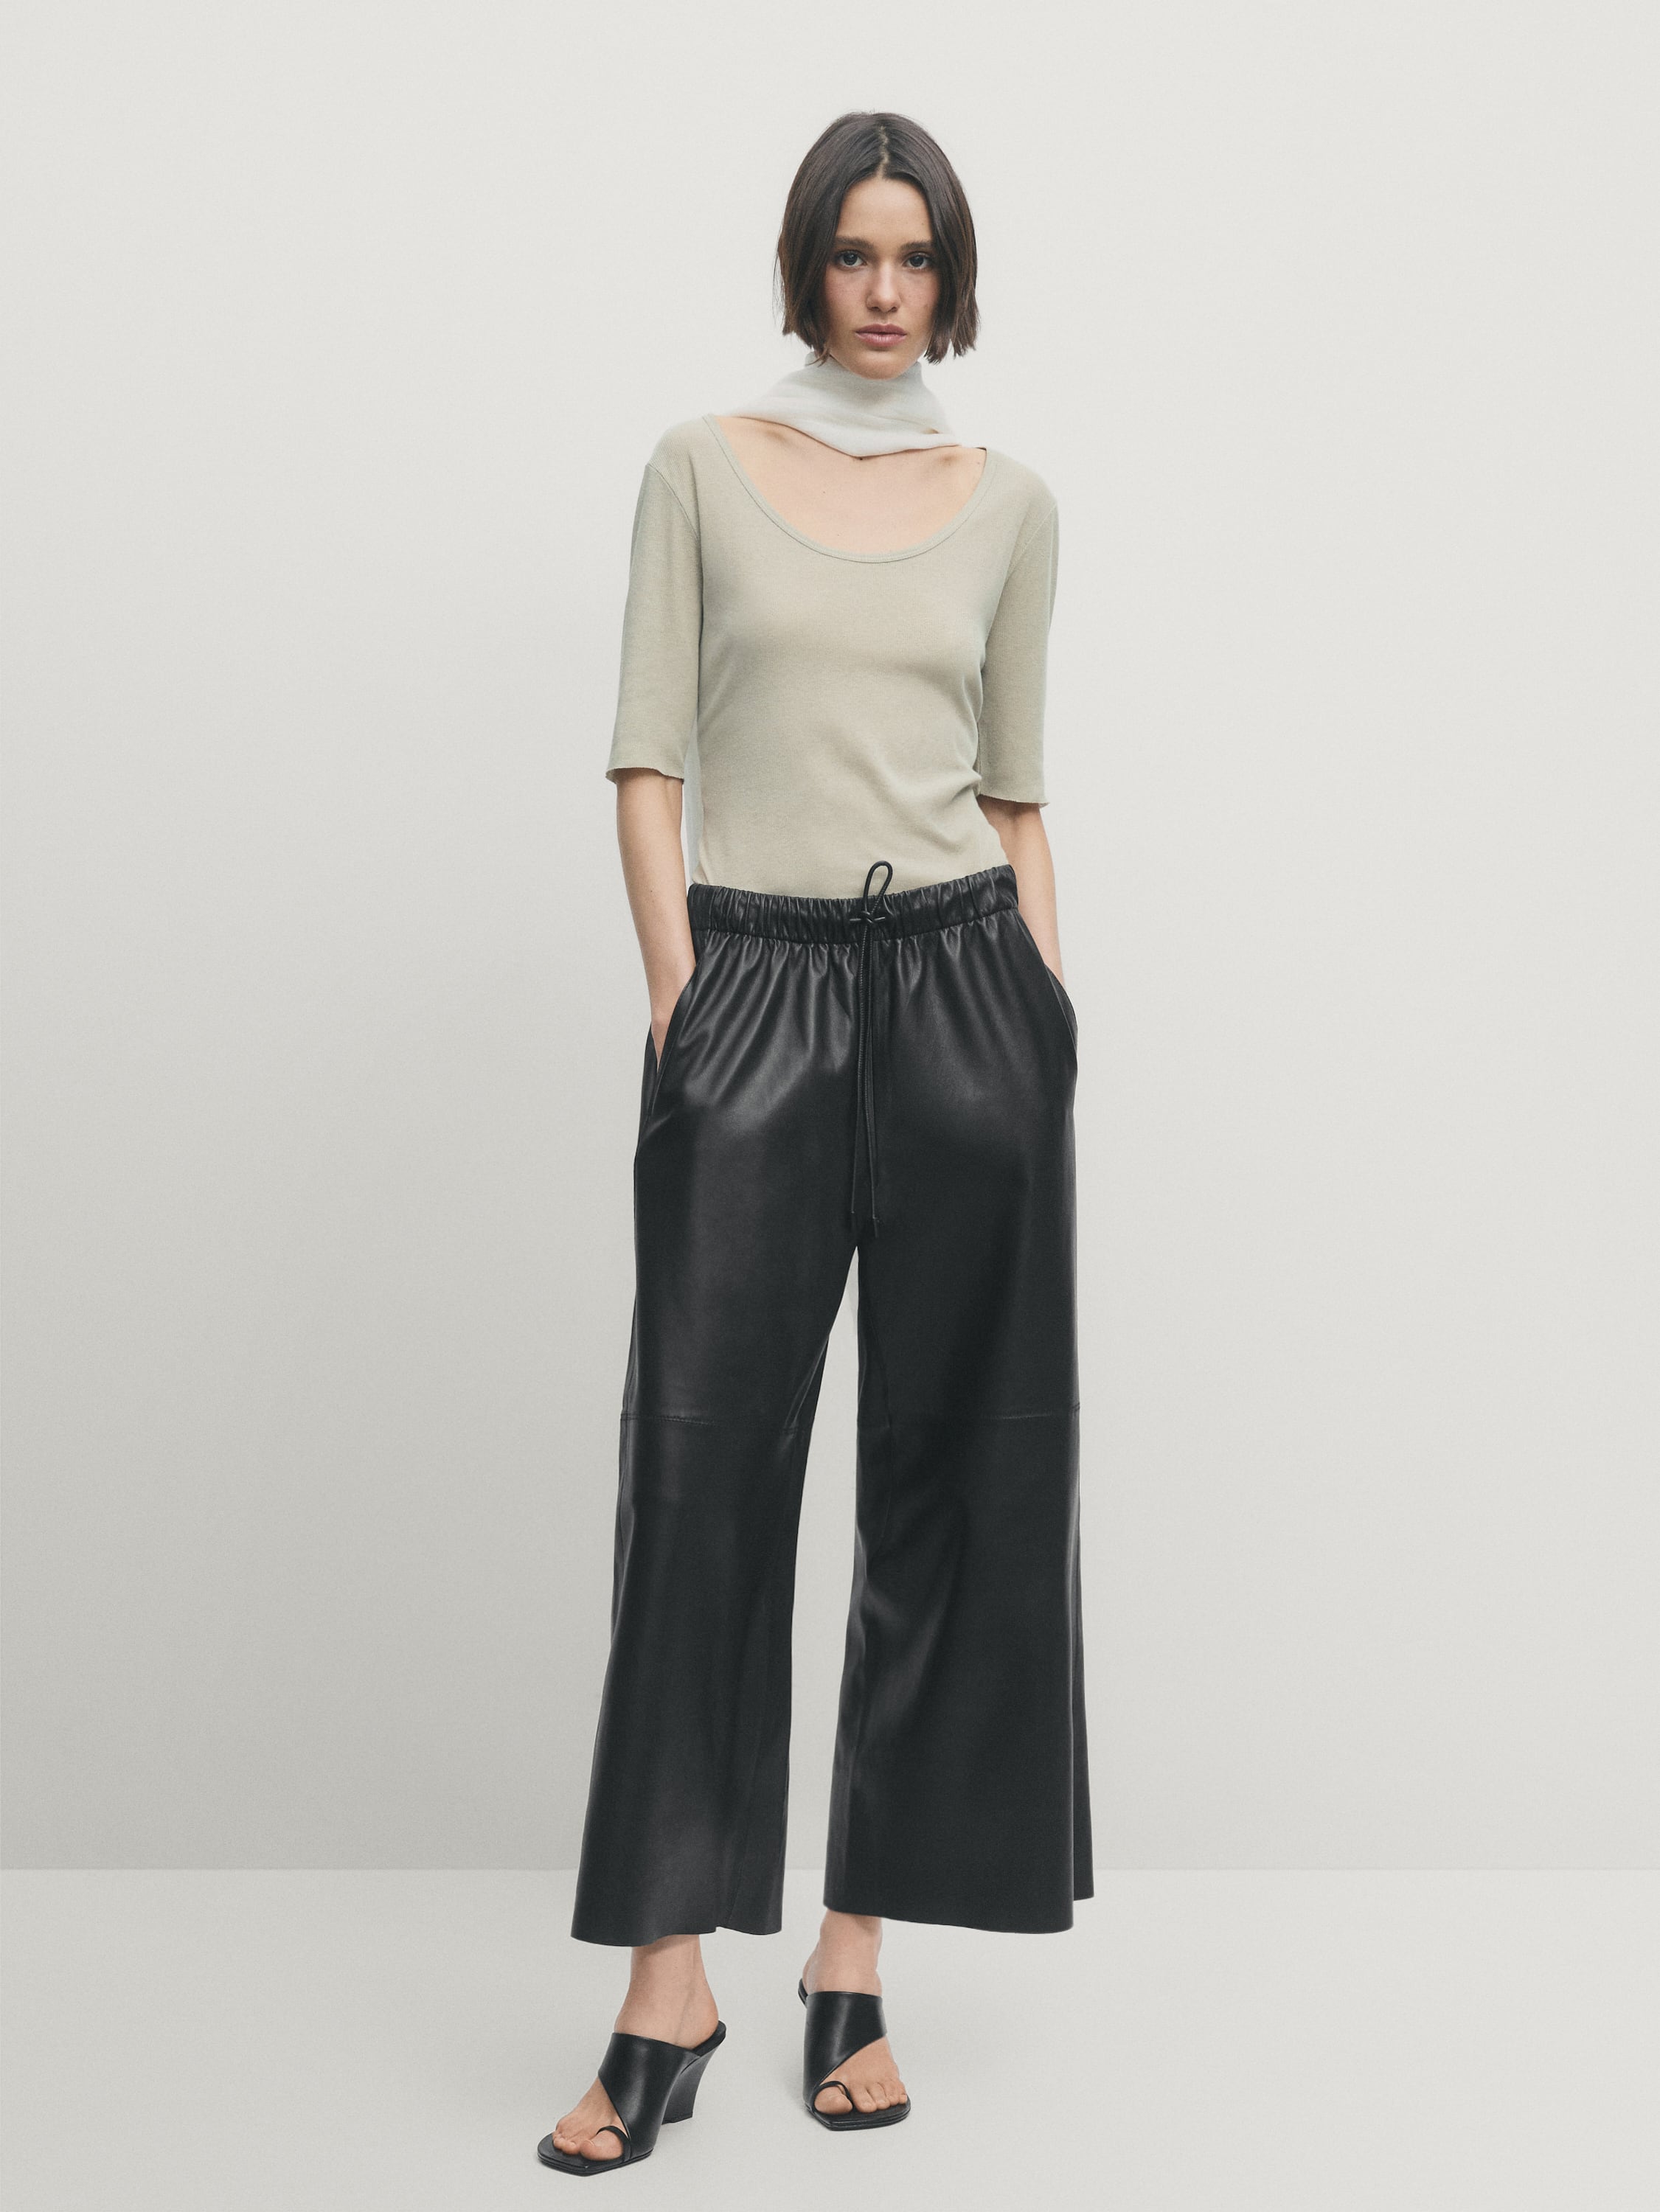 Nappa leather culotte trousers